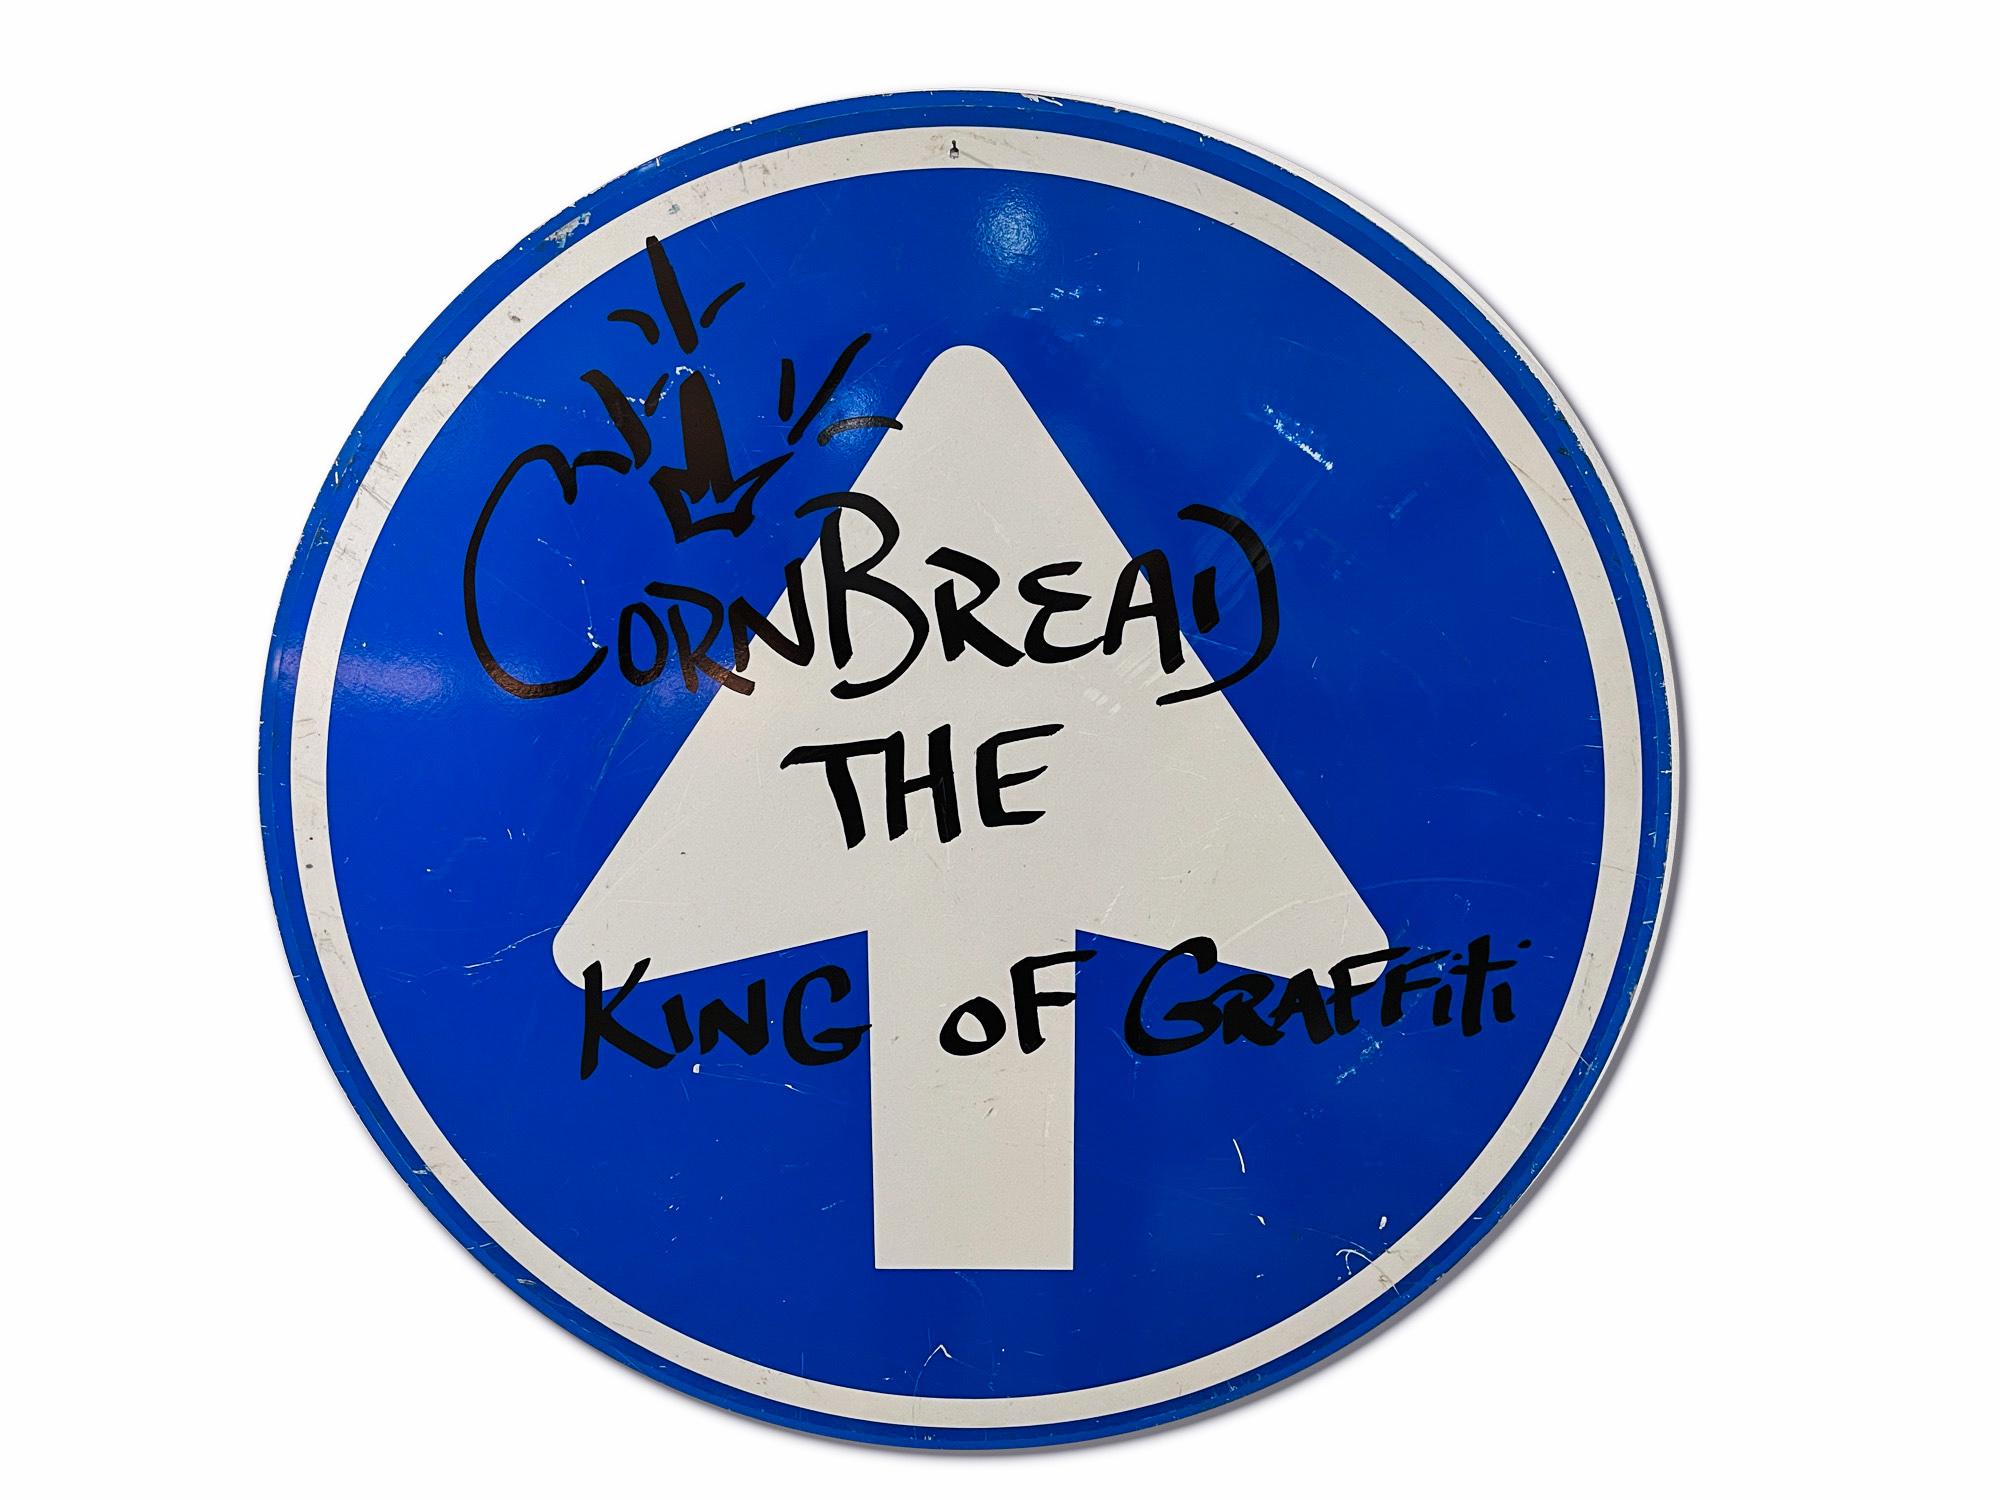 This artwork titled "Cornbread The King Of Graffiti Shield (Blue)" is an original artwork by Cornbread made of acrylic paint on a retired Amsterdam street sign. The piece measures 80cm / 31.5in diameter.

Darryl McCray, known by his tagging name,